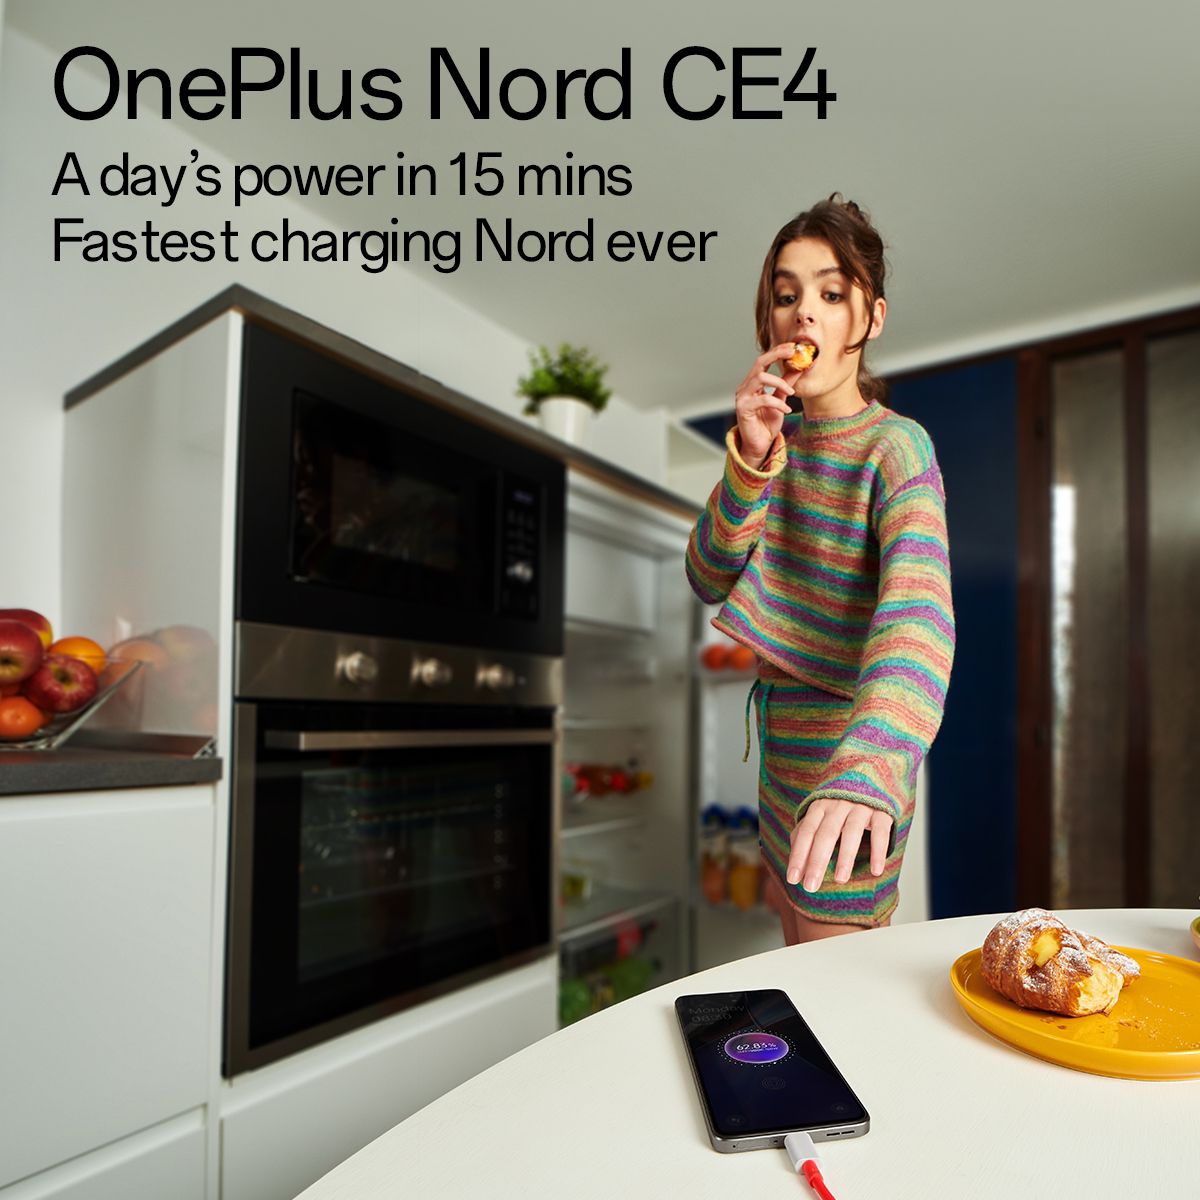 OnePlus Nord CE 4: When and Where to Watch the Launch